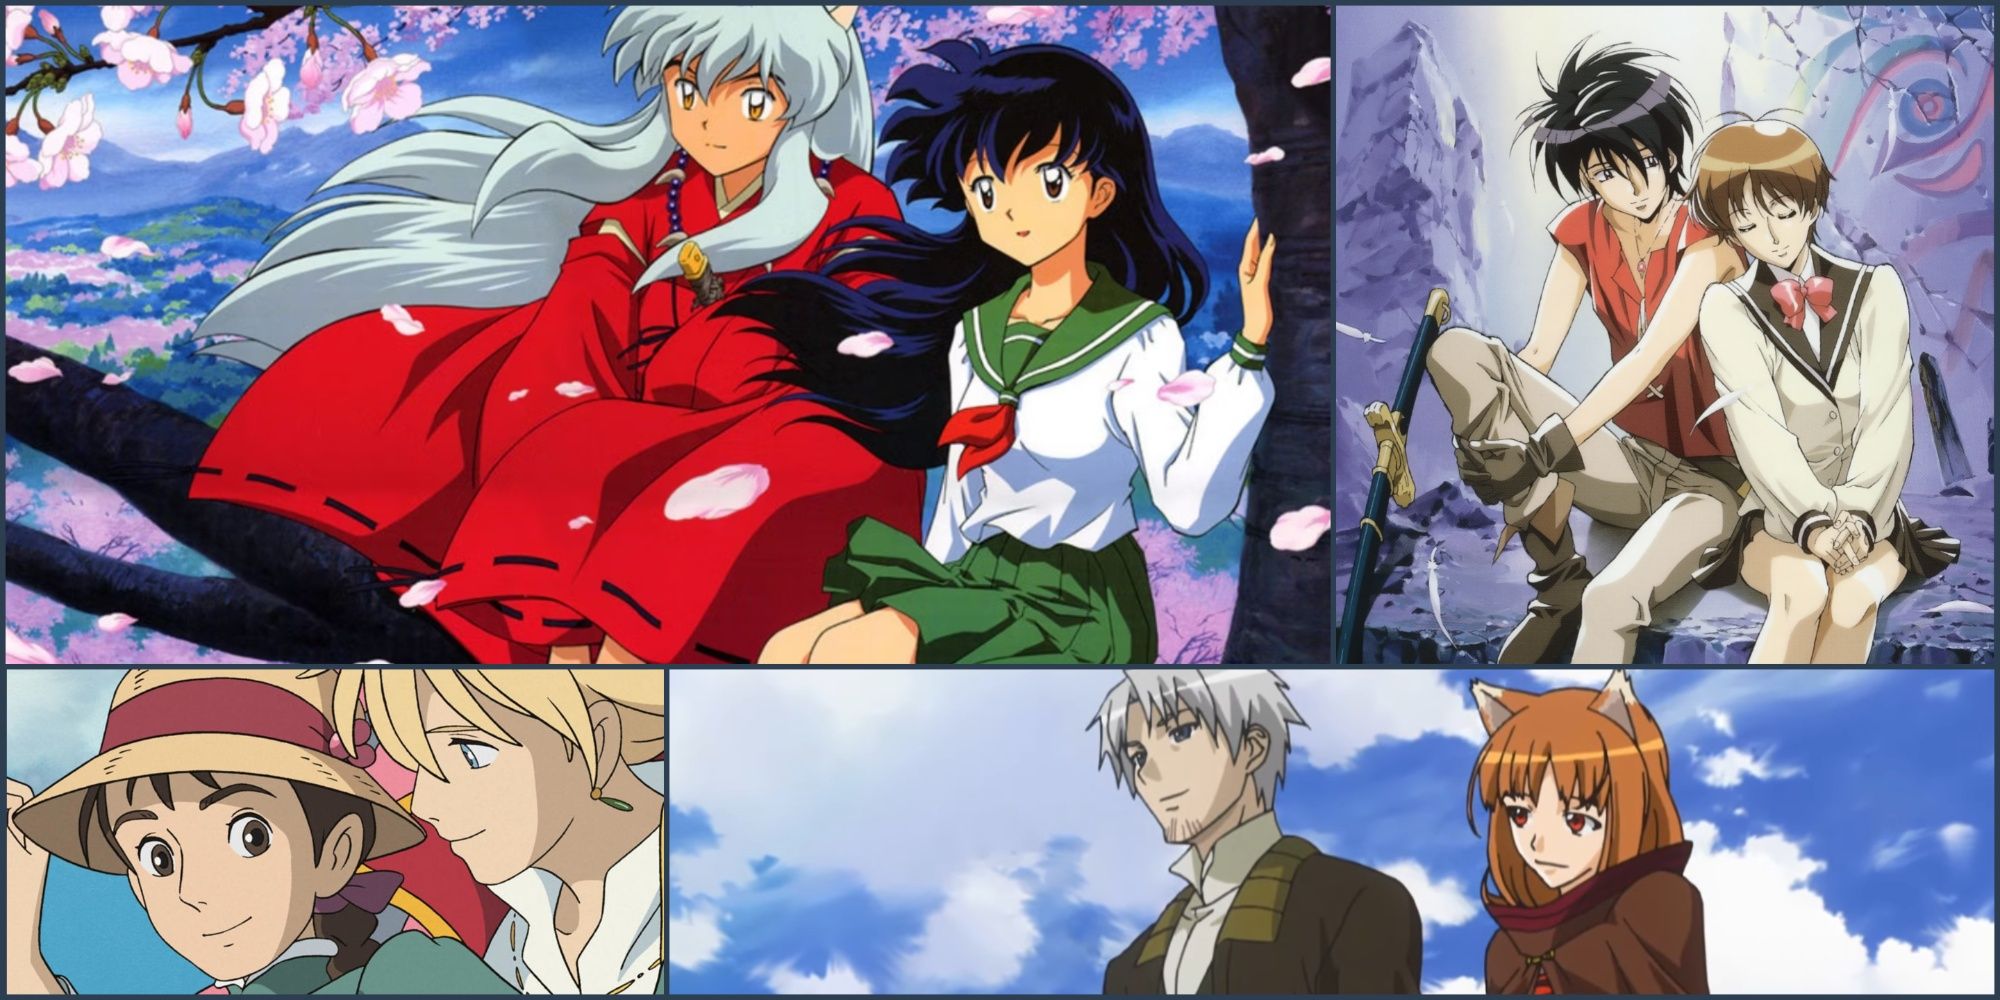 Inuyasha, Escaflowne, Howl's Moving Castle. Spice & Wolf